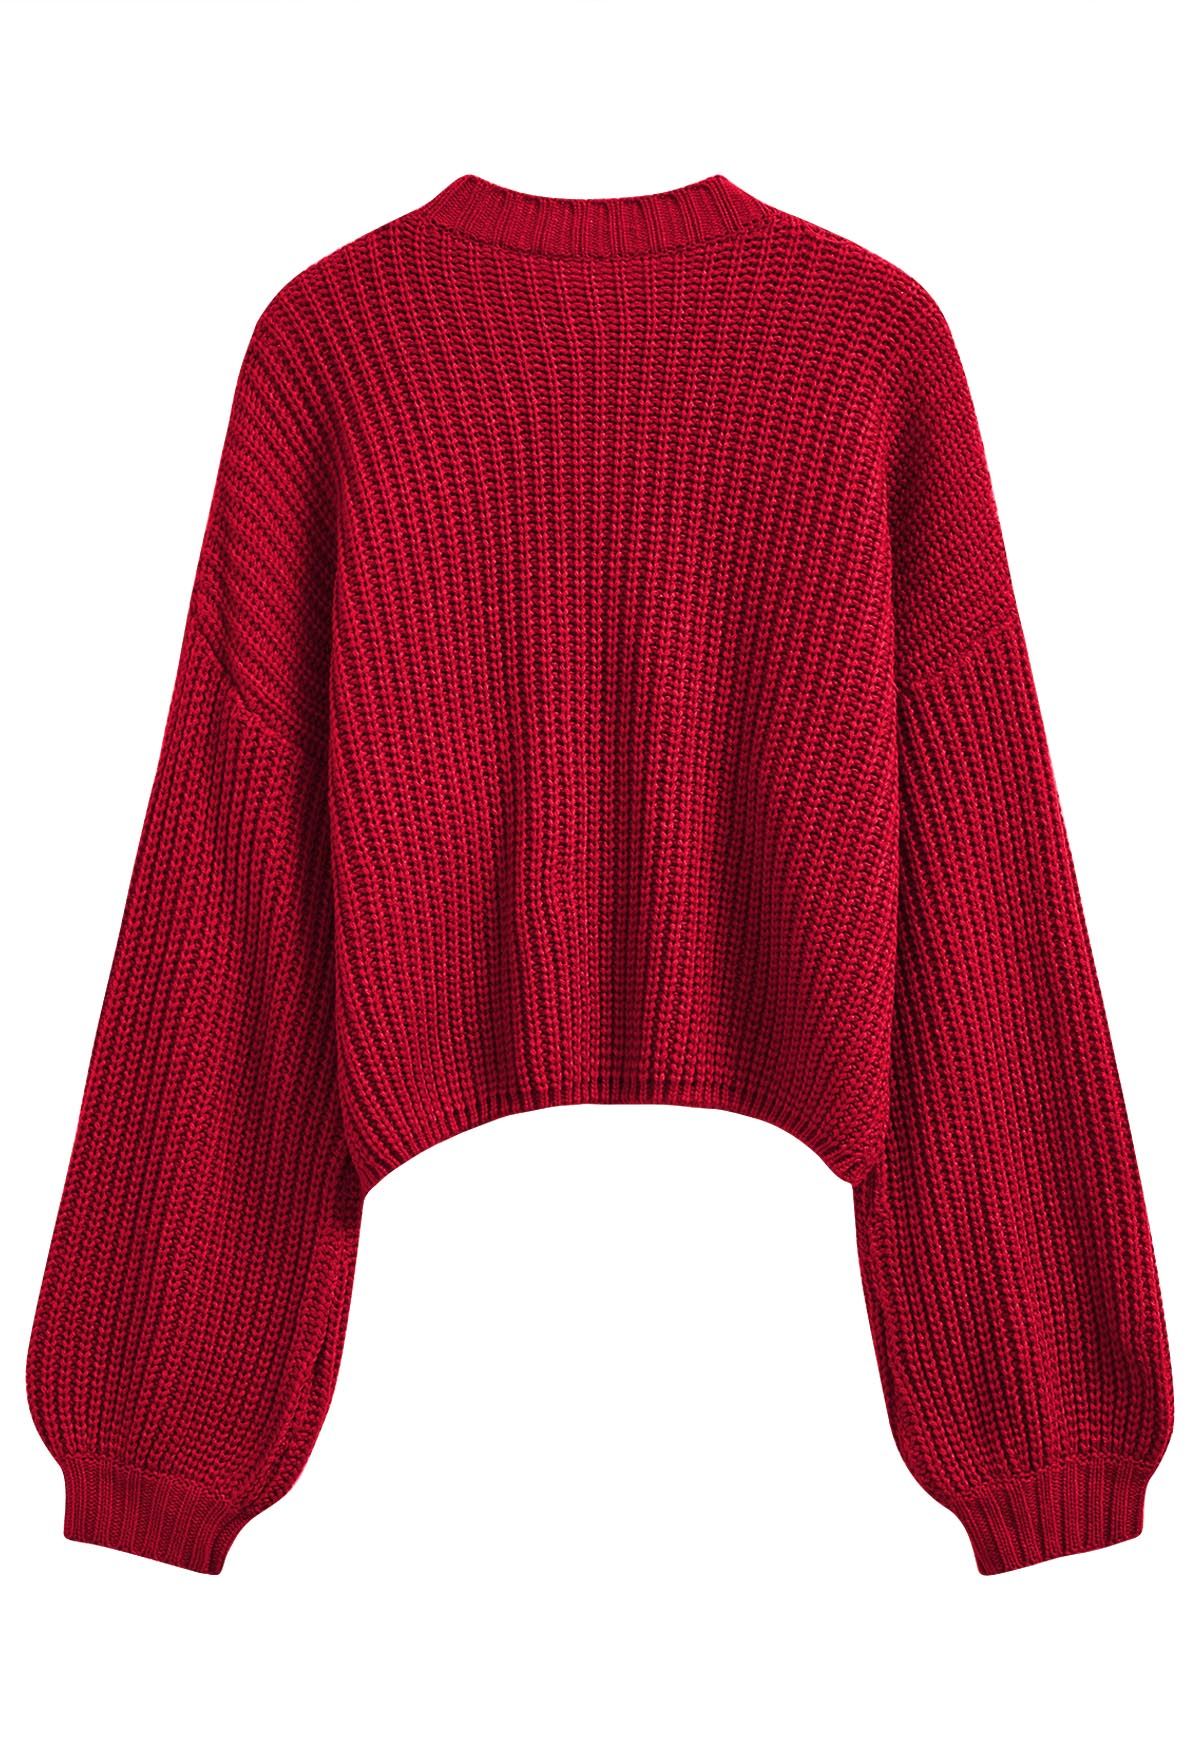 Gingerbread Man Patch Ribbed Sweater in Red - Retro, Indie and Unique ...